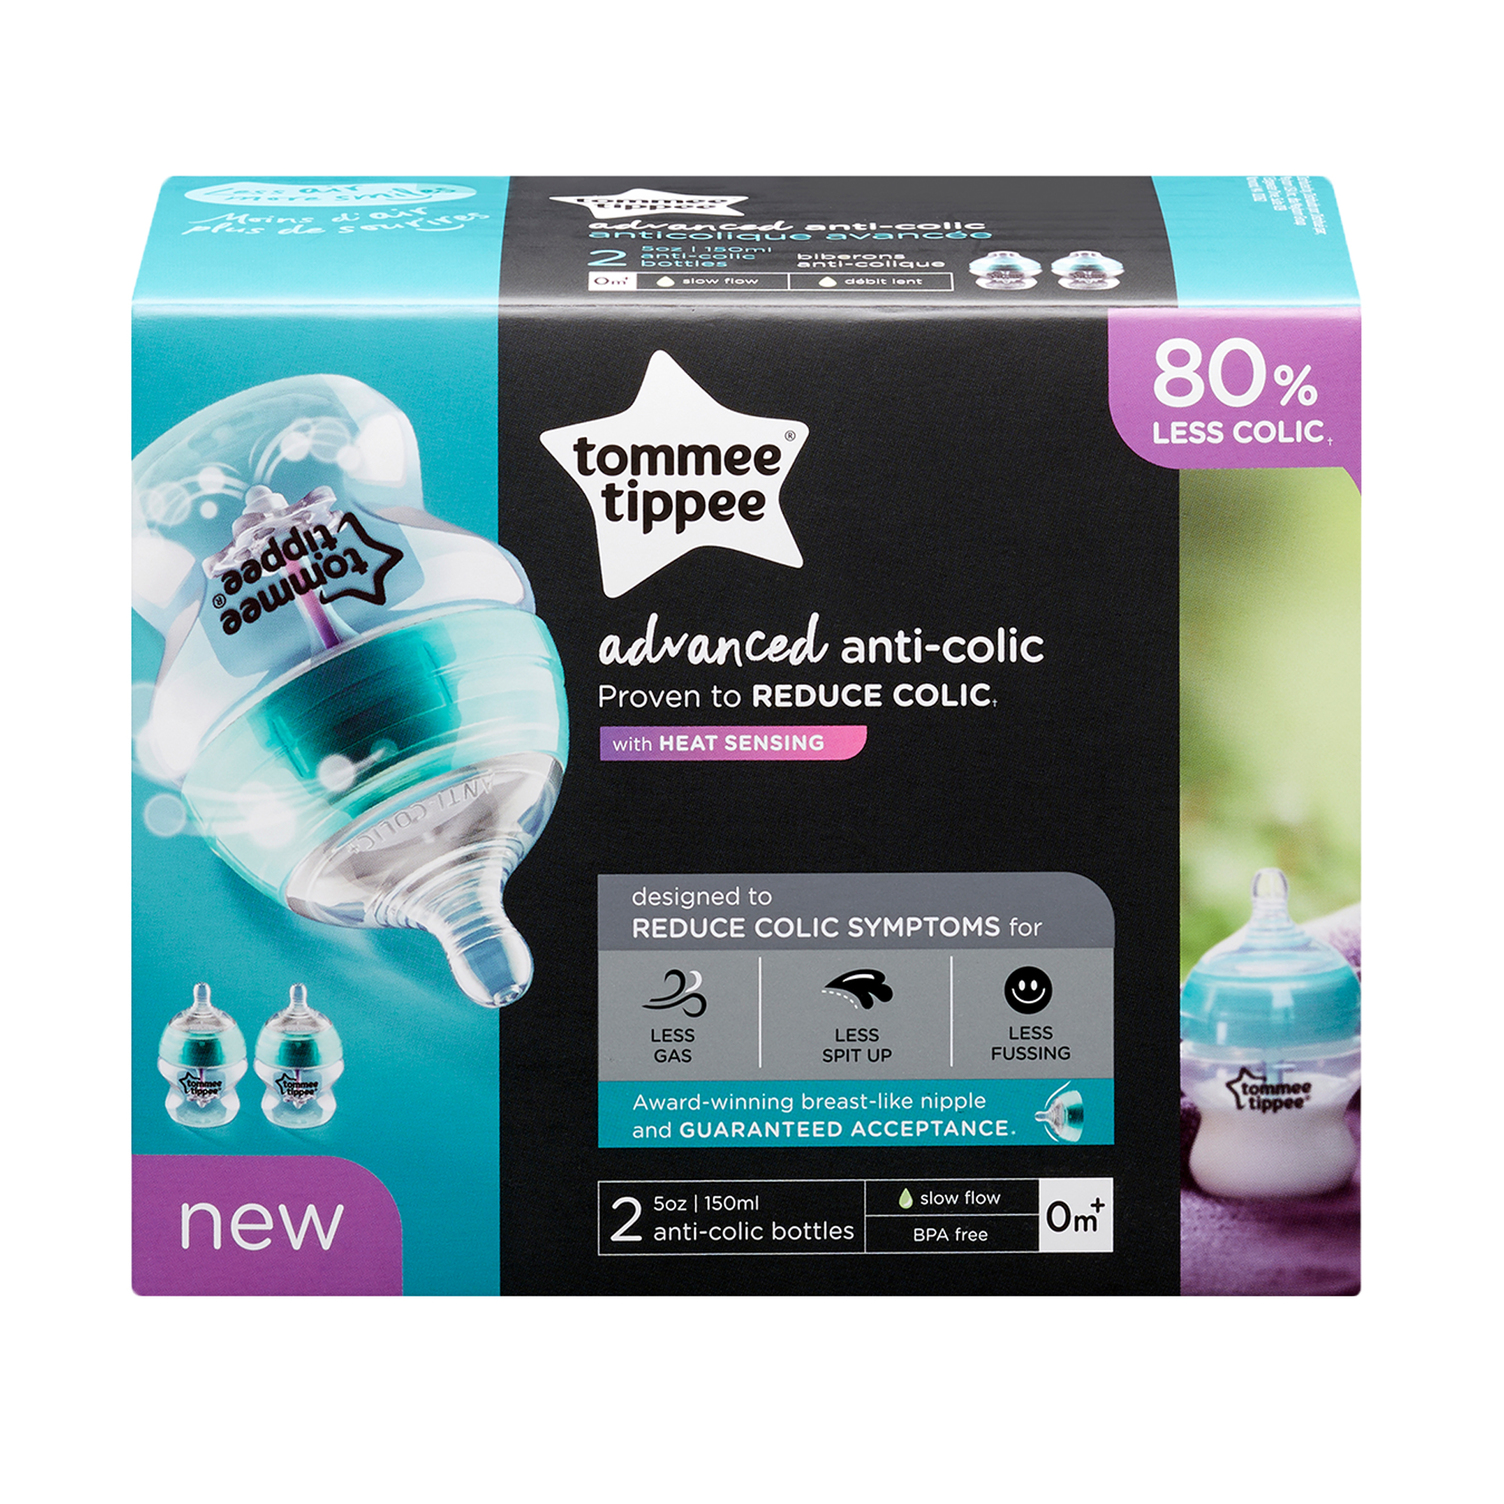 Tommee Tippee Advanced Anti-Colic Baby Bottles – 5oz, Clear, 2pk - image 5 of 10